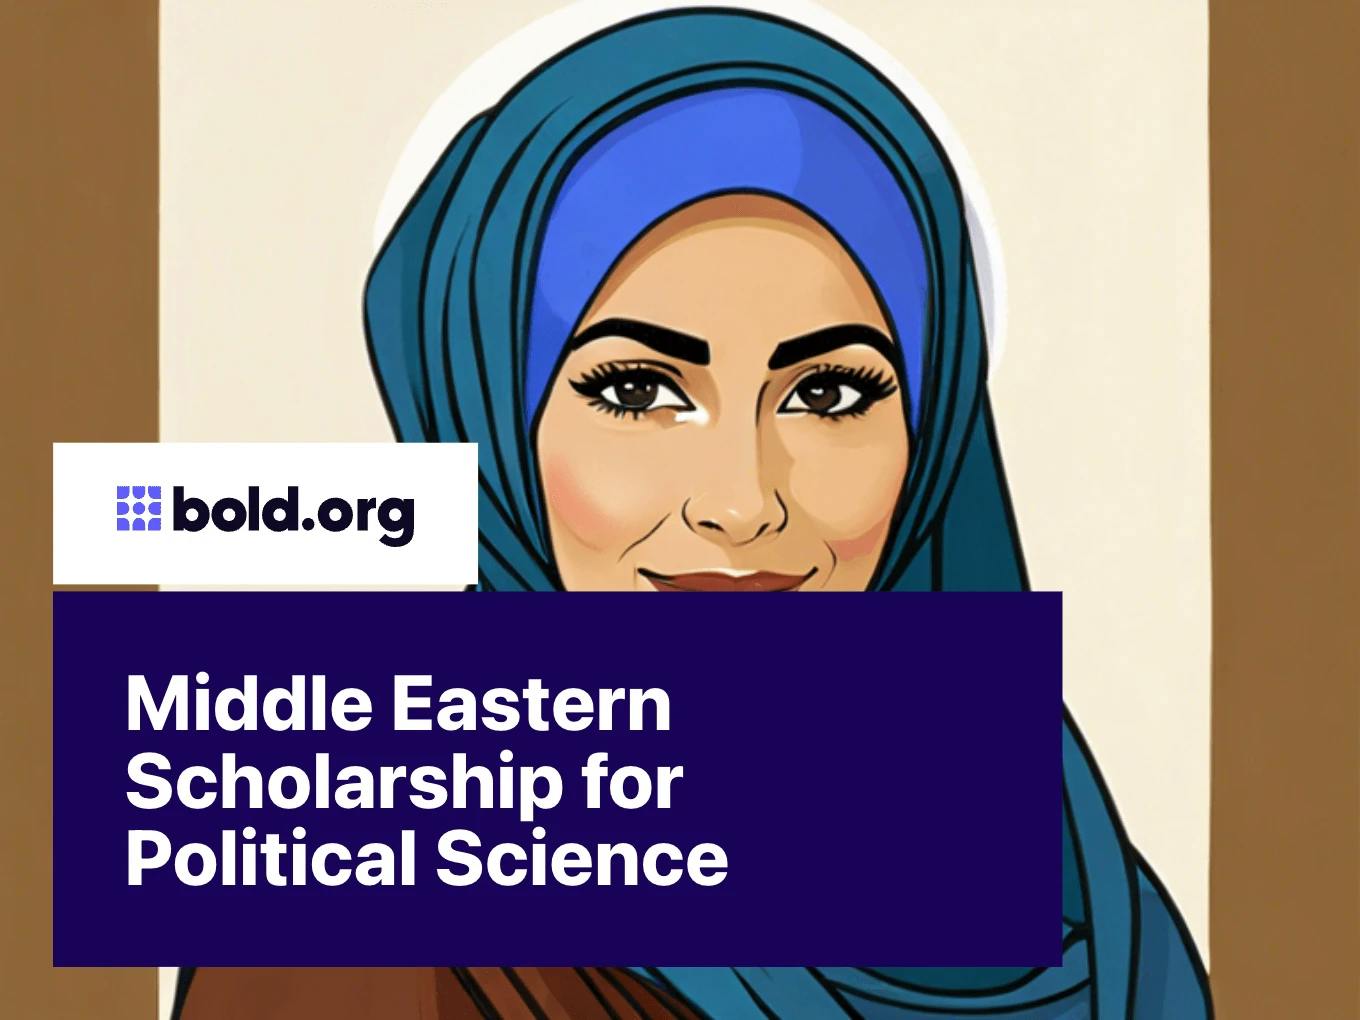 Middle Eastern Scholarship for Political Science